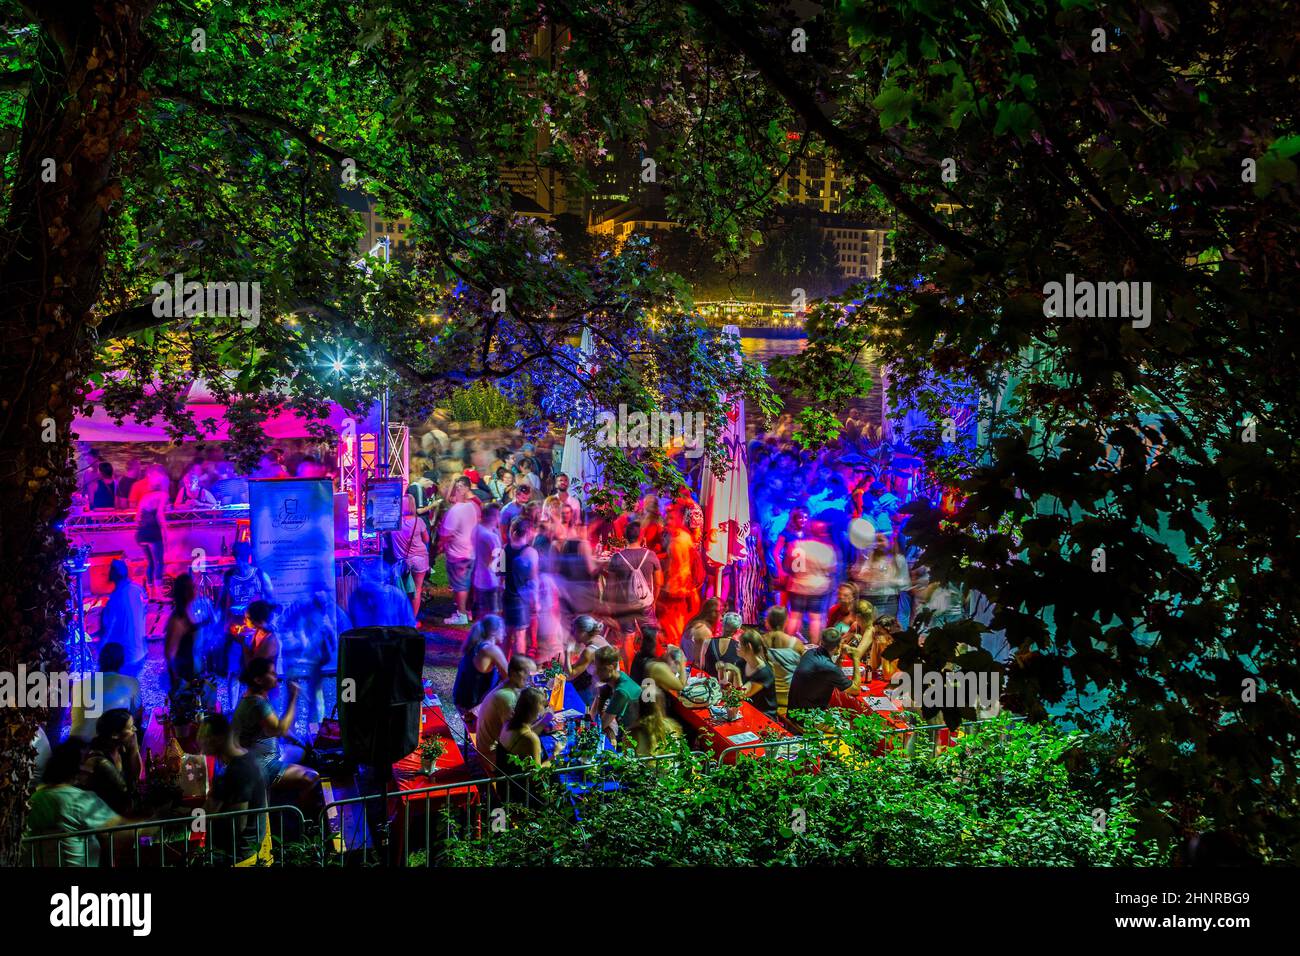 people enjoying the museum festival in Frankfurt, Germany in the park with light installations Stock Photo